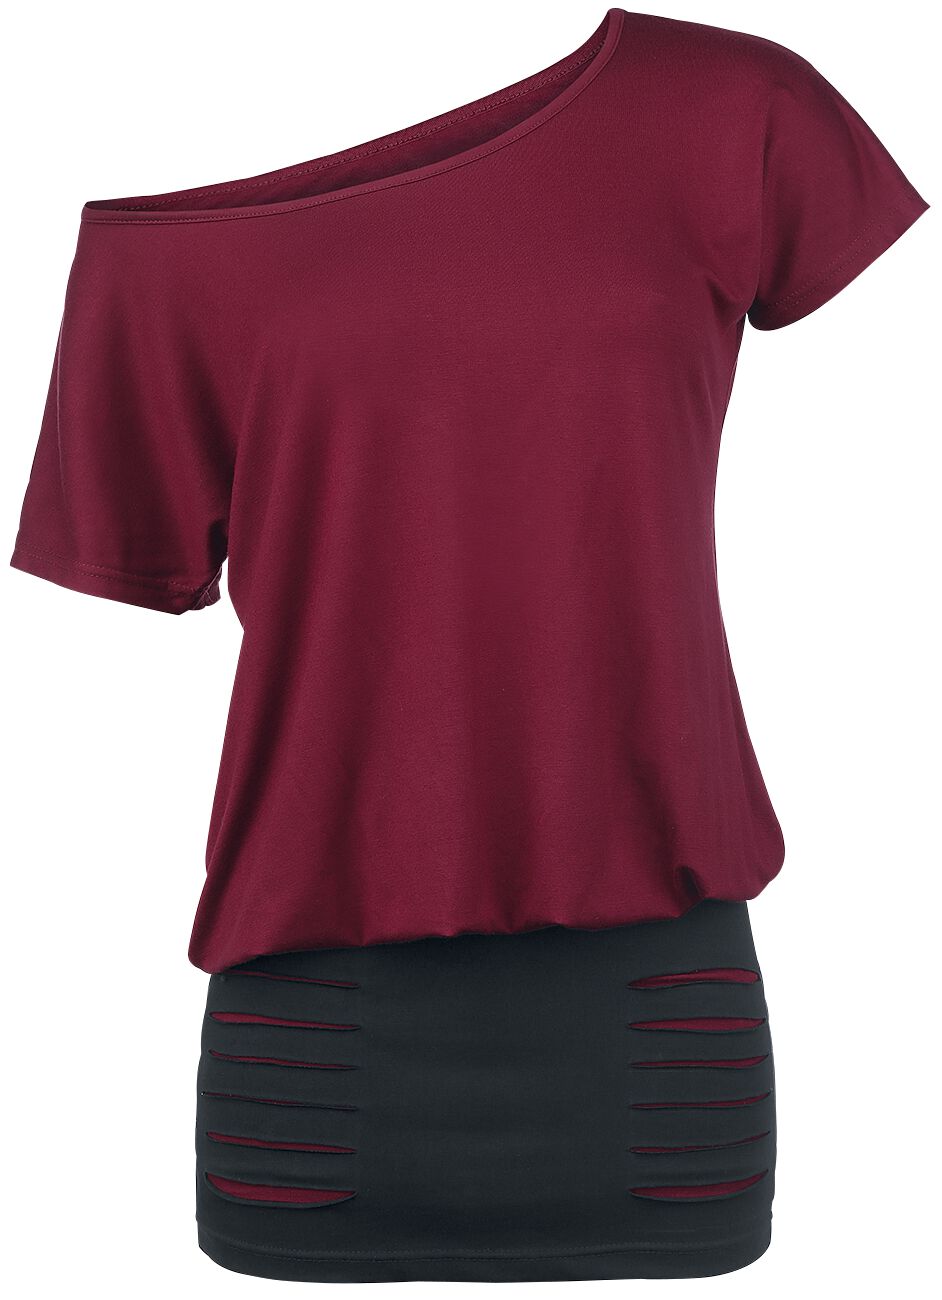 Image of Miniabito di RED by EMP - Hold Loosely - XS a XXL - Donna - bordeaux/nero